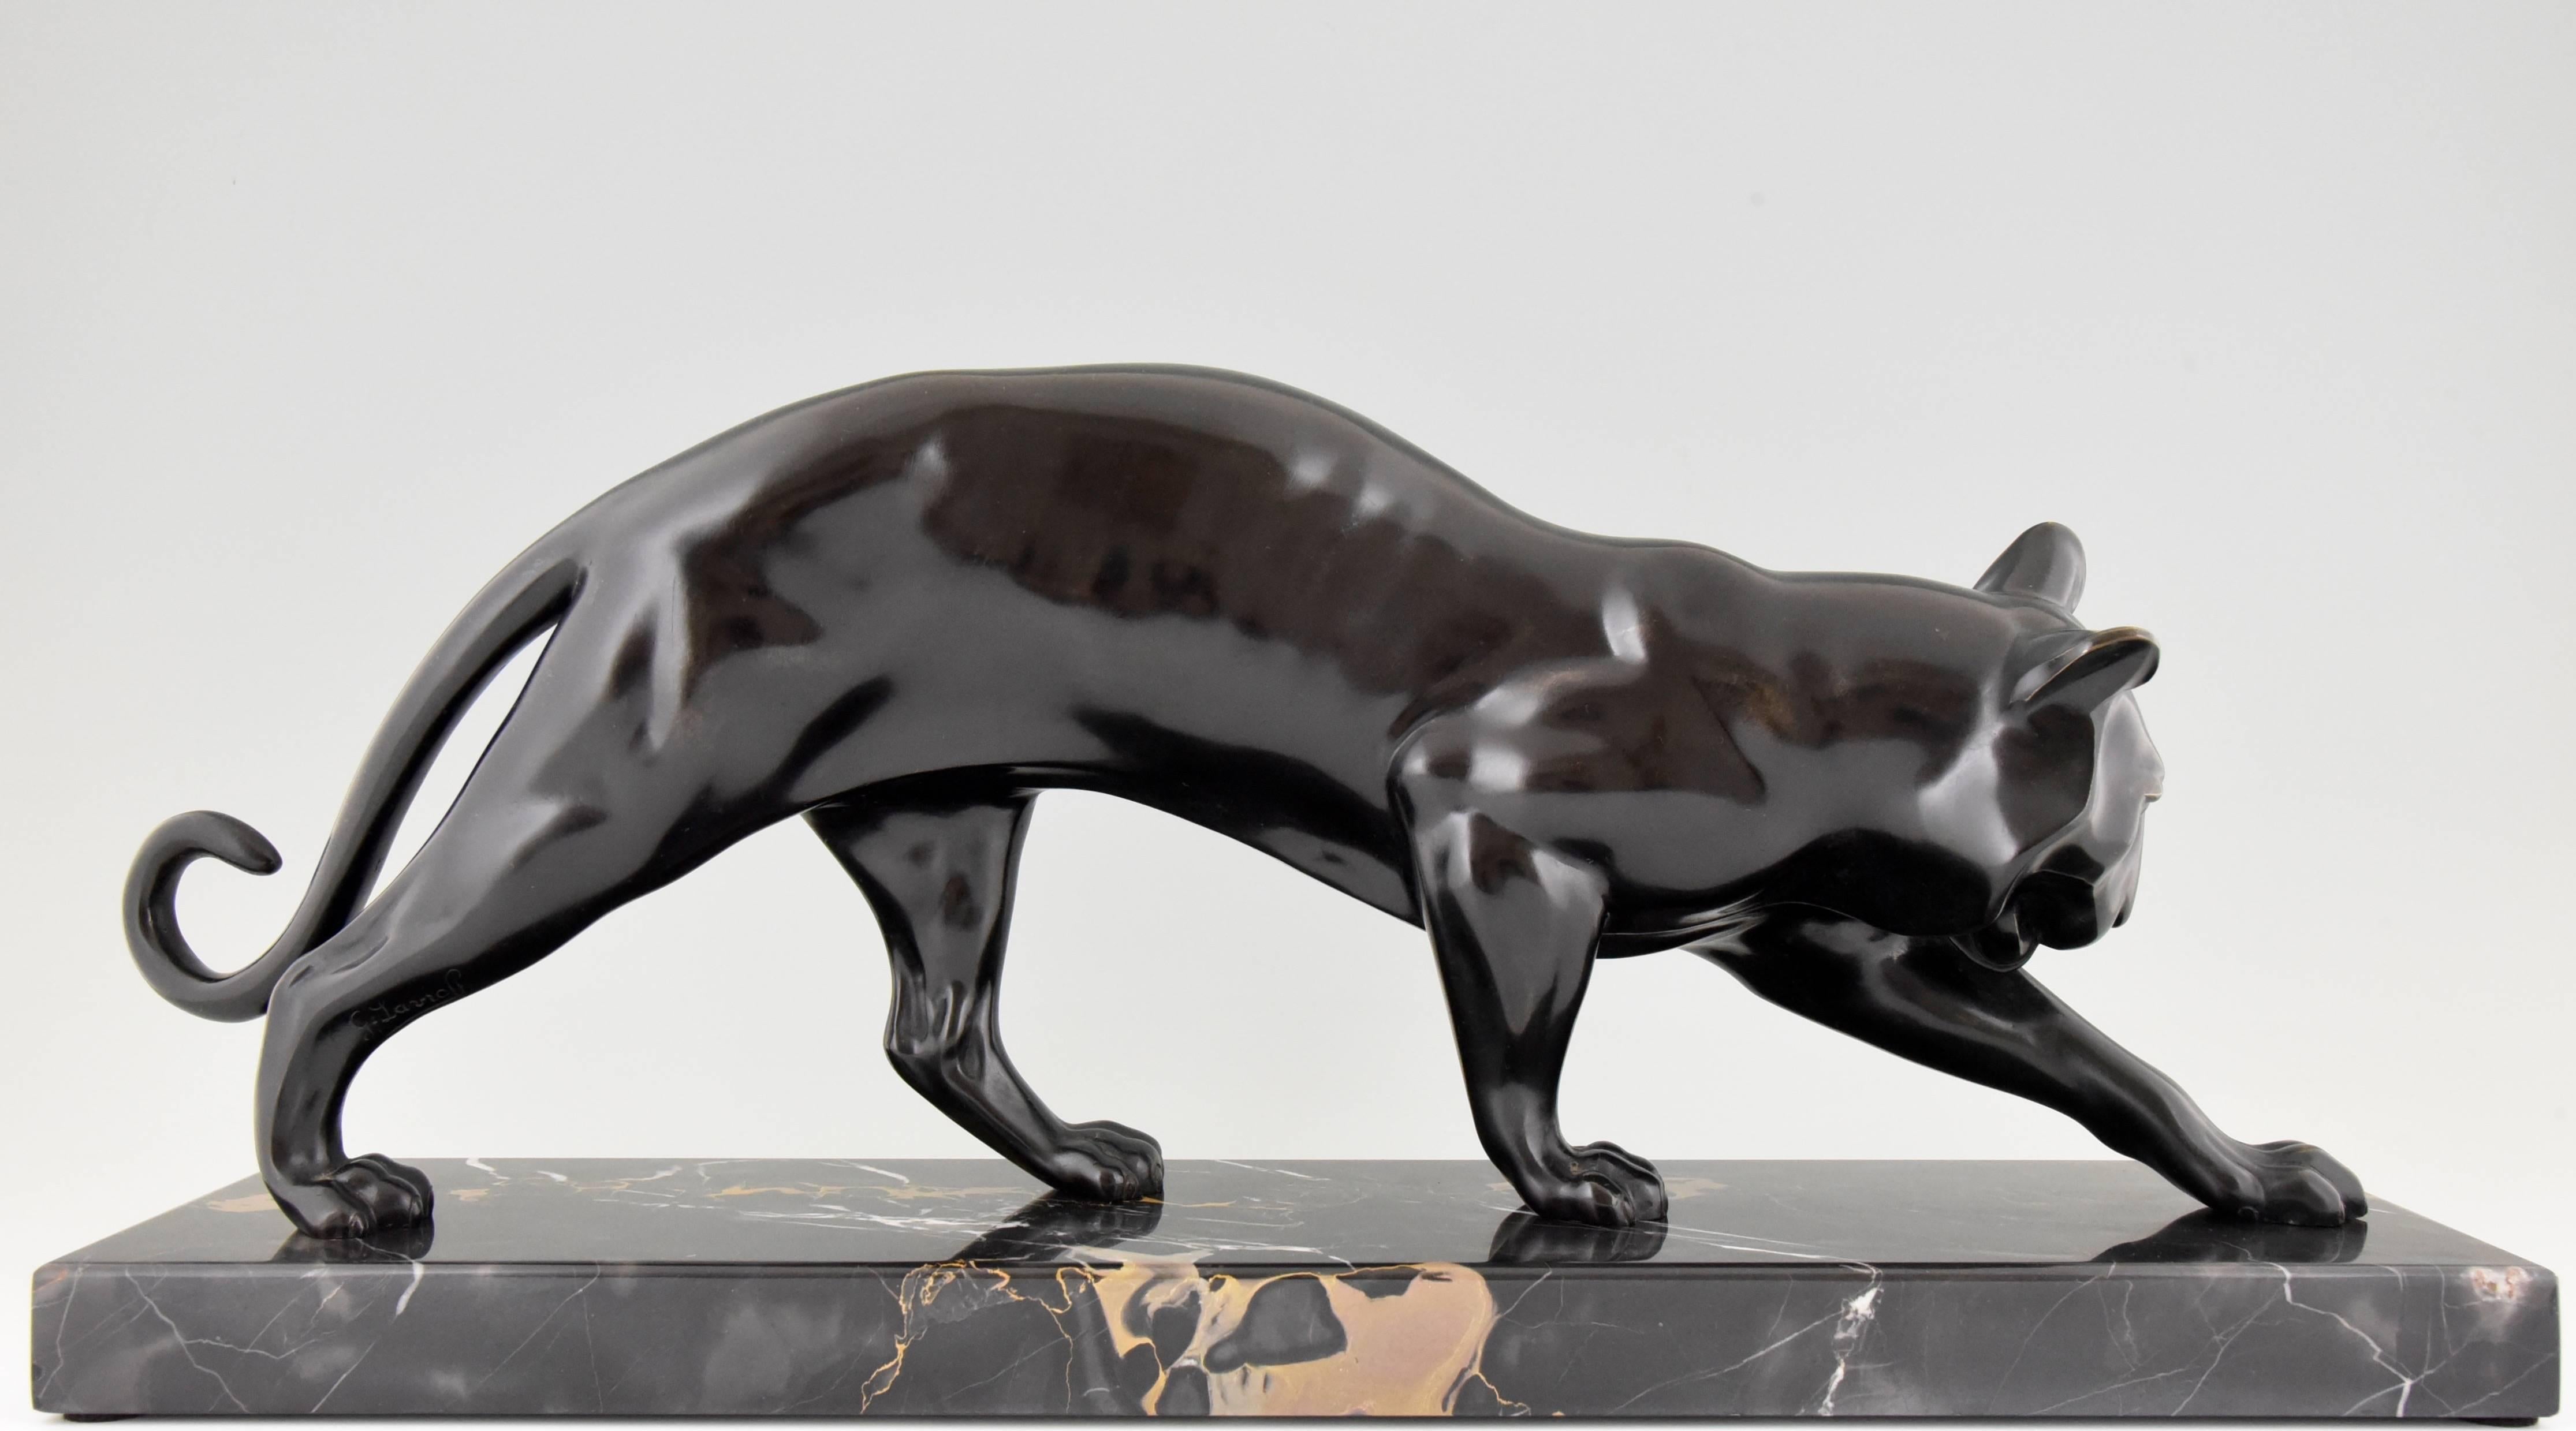 Description:
Art Deco bronze sculpture of a panther. 

Artist/ maker: 
Georges Lavroff.
Born in Russia in 1895, lived and worked in France. 

Signature & Marks:
G. Lavroff.
Bronze, Paris. 

Style: 
Art Deco.

Condition: 
Excellent